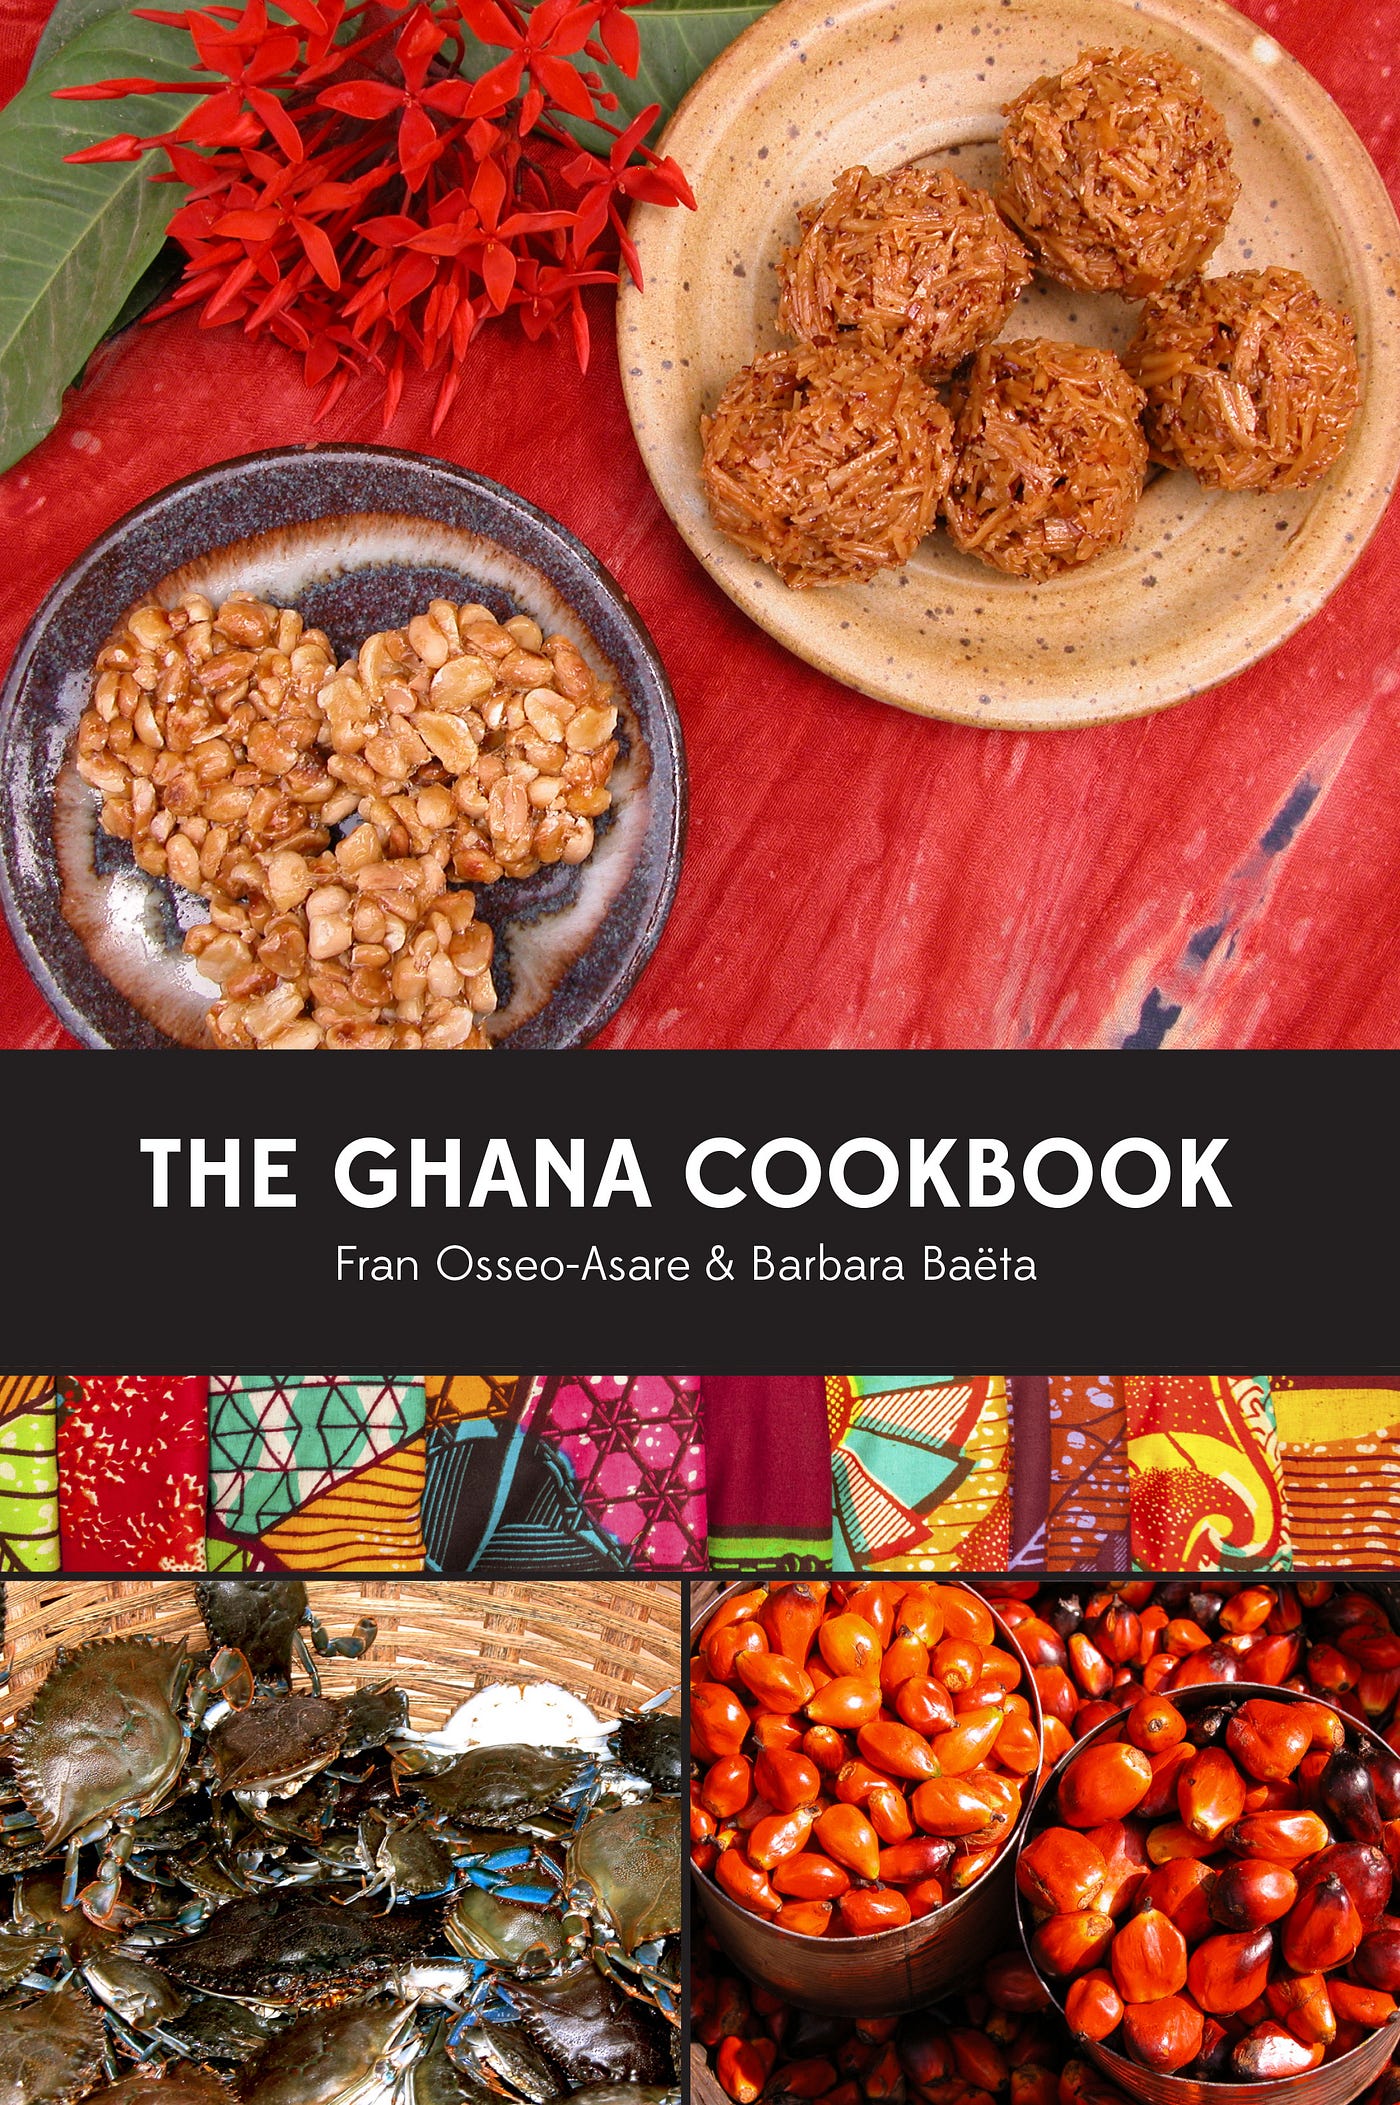 The West African Cookbook Gone to Ghana